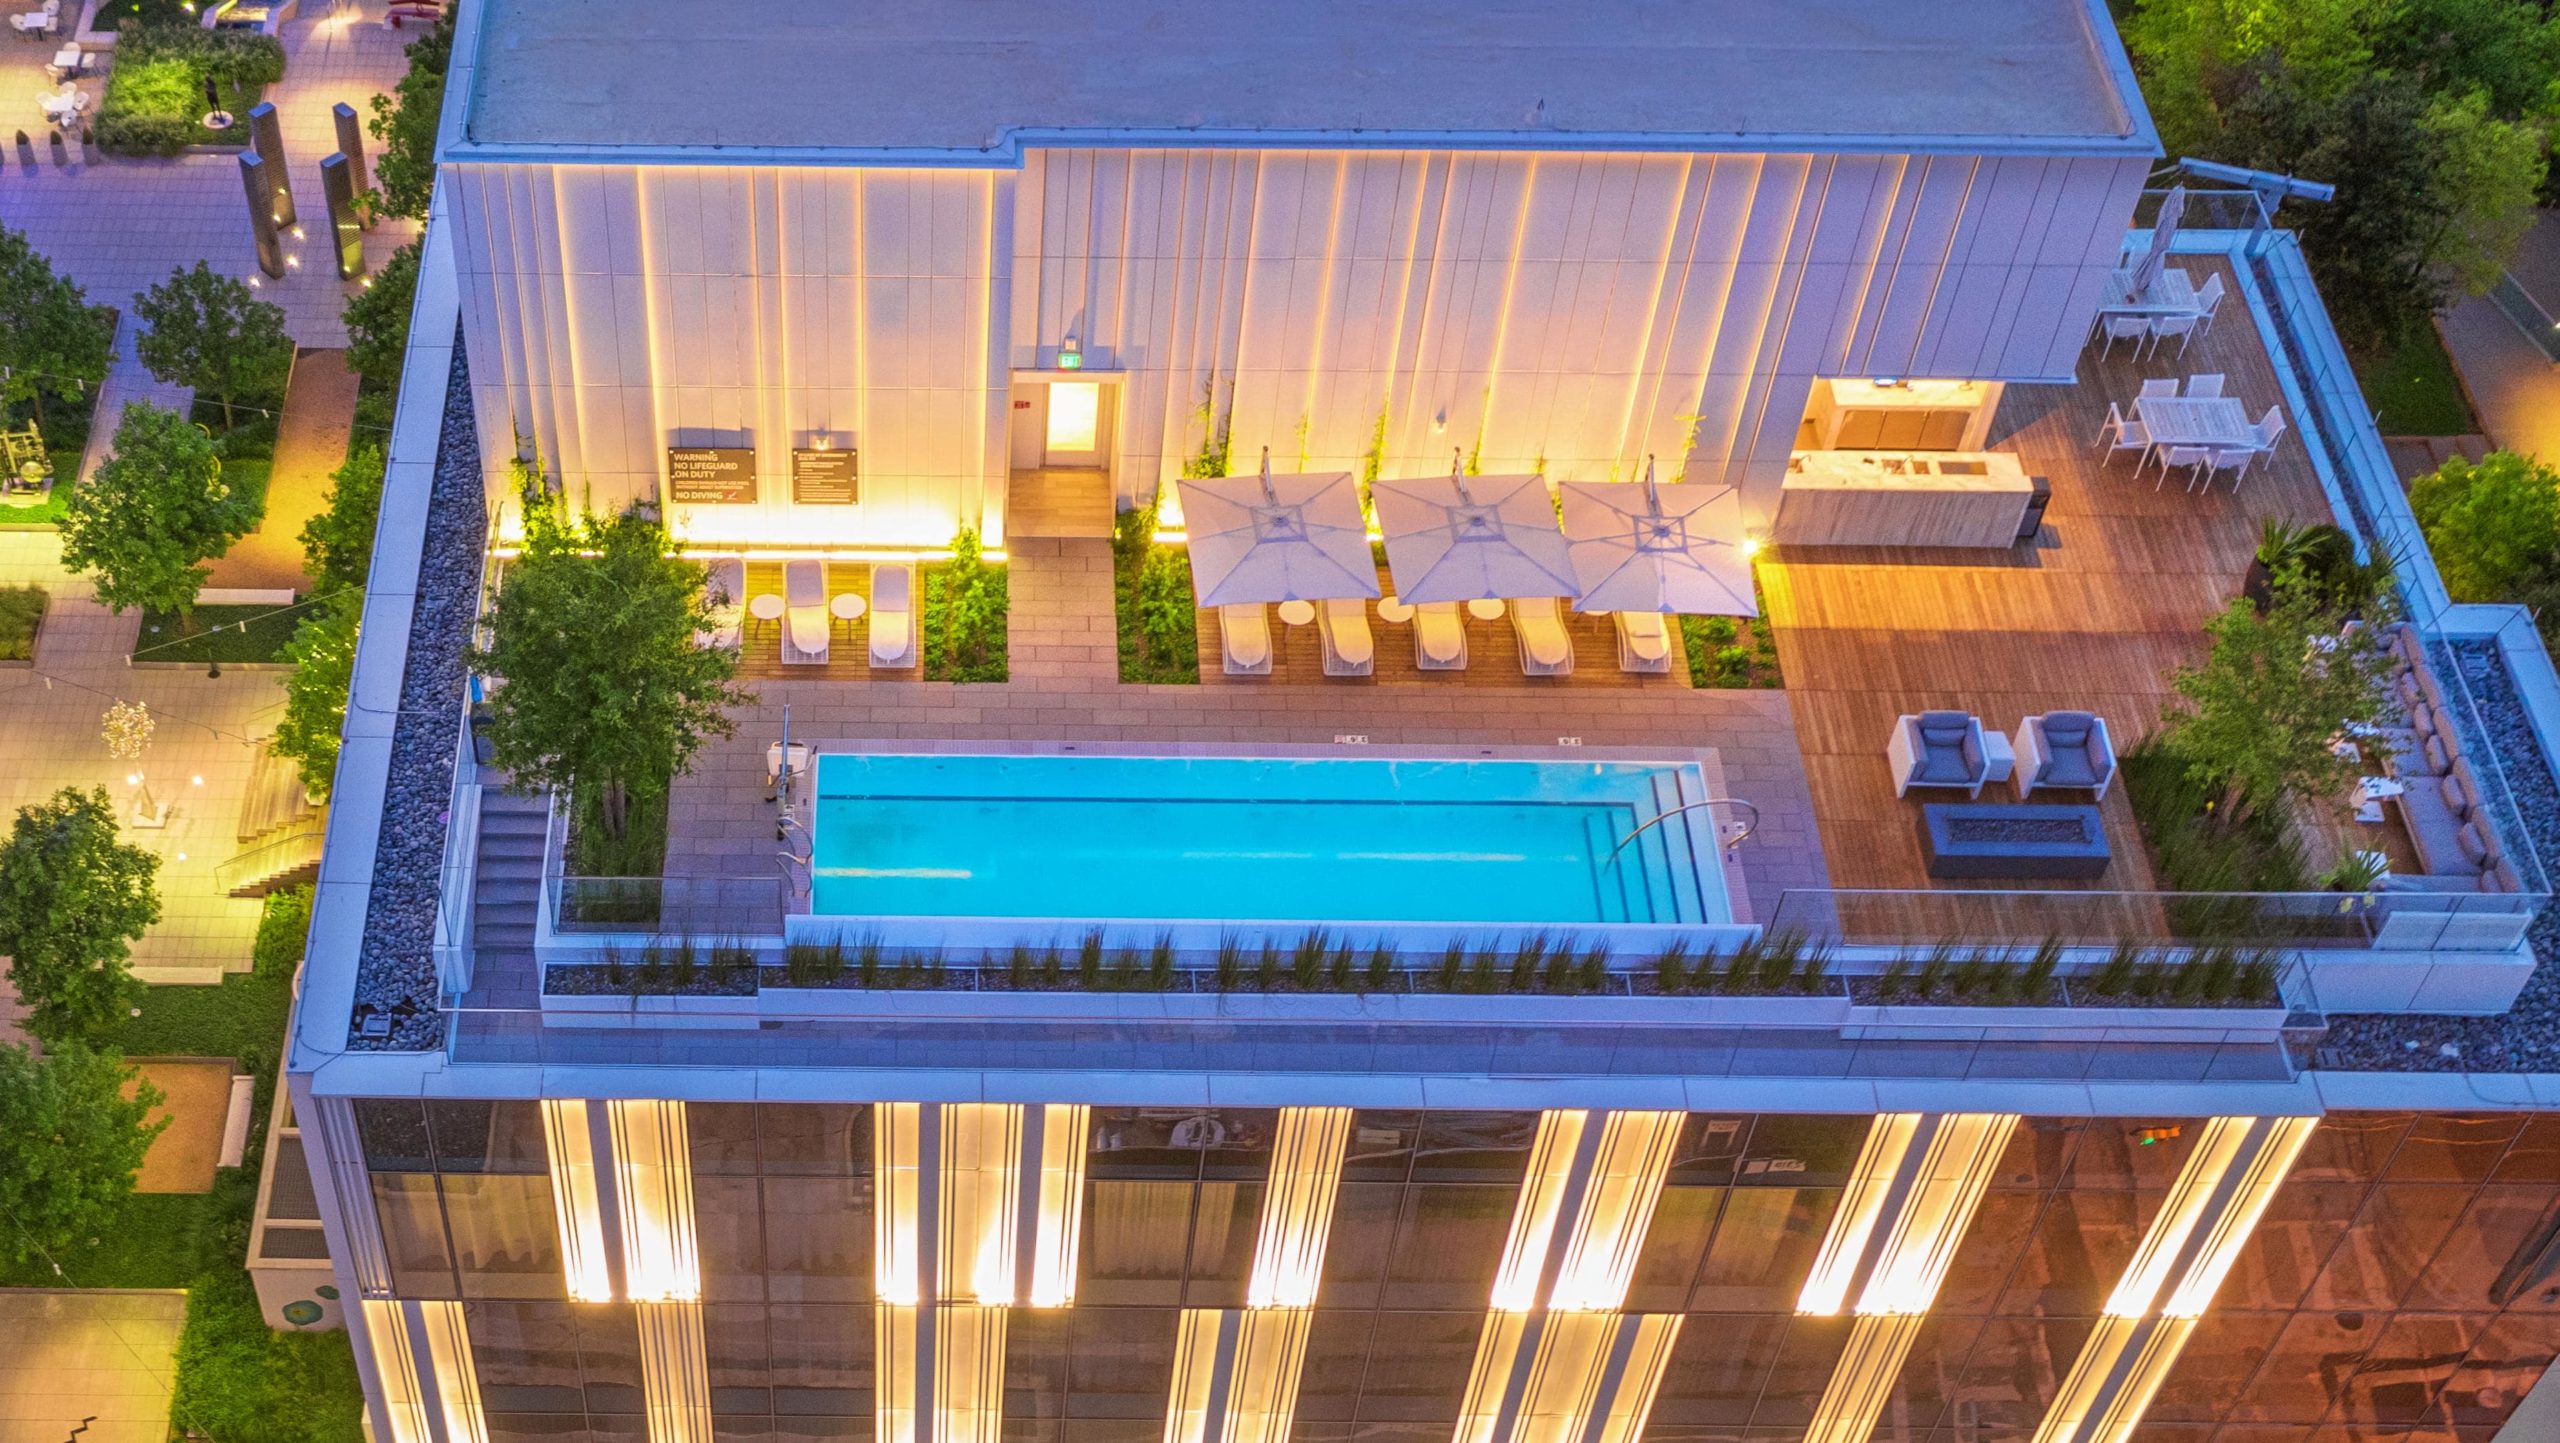 The Best Dallas Hotel Pools to Dip Into This Summer